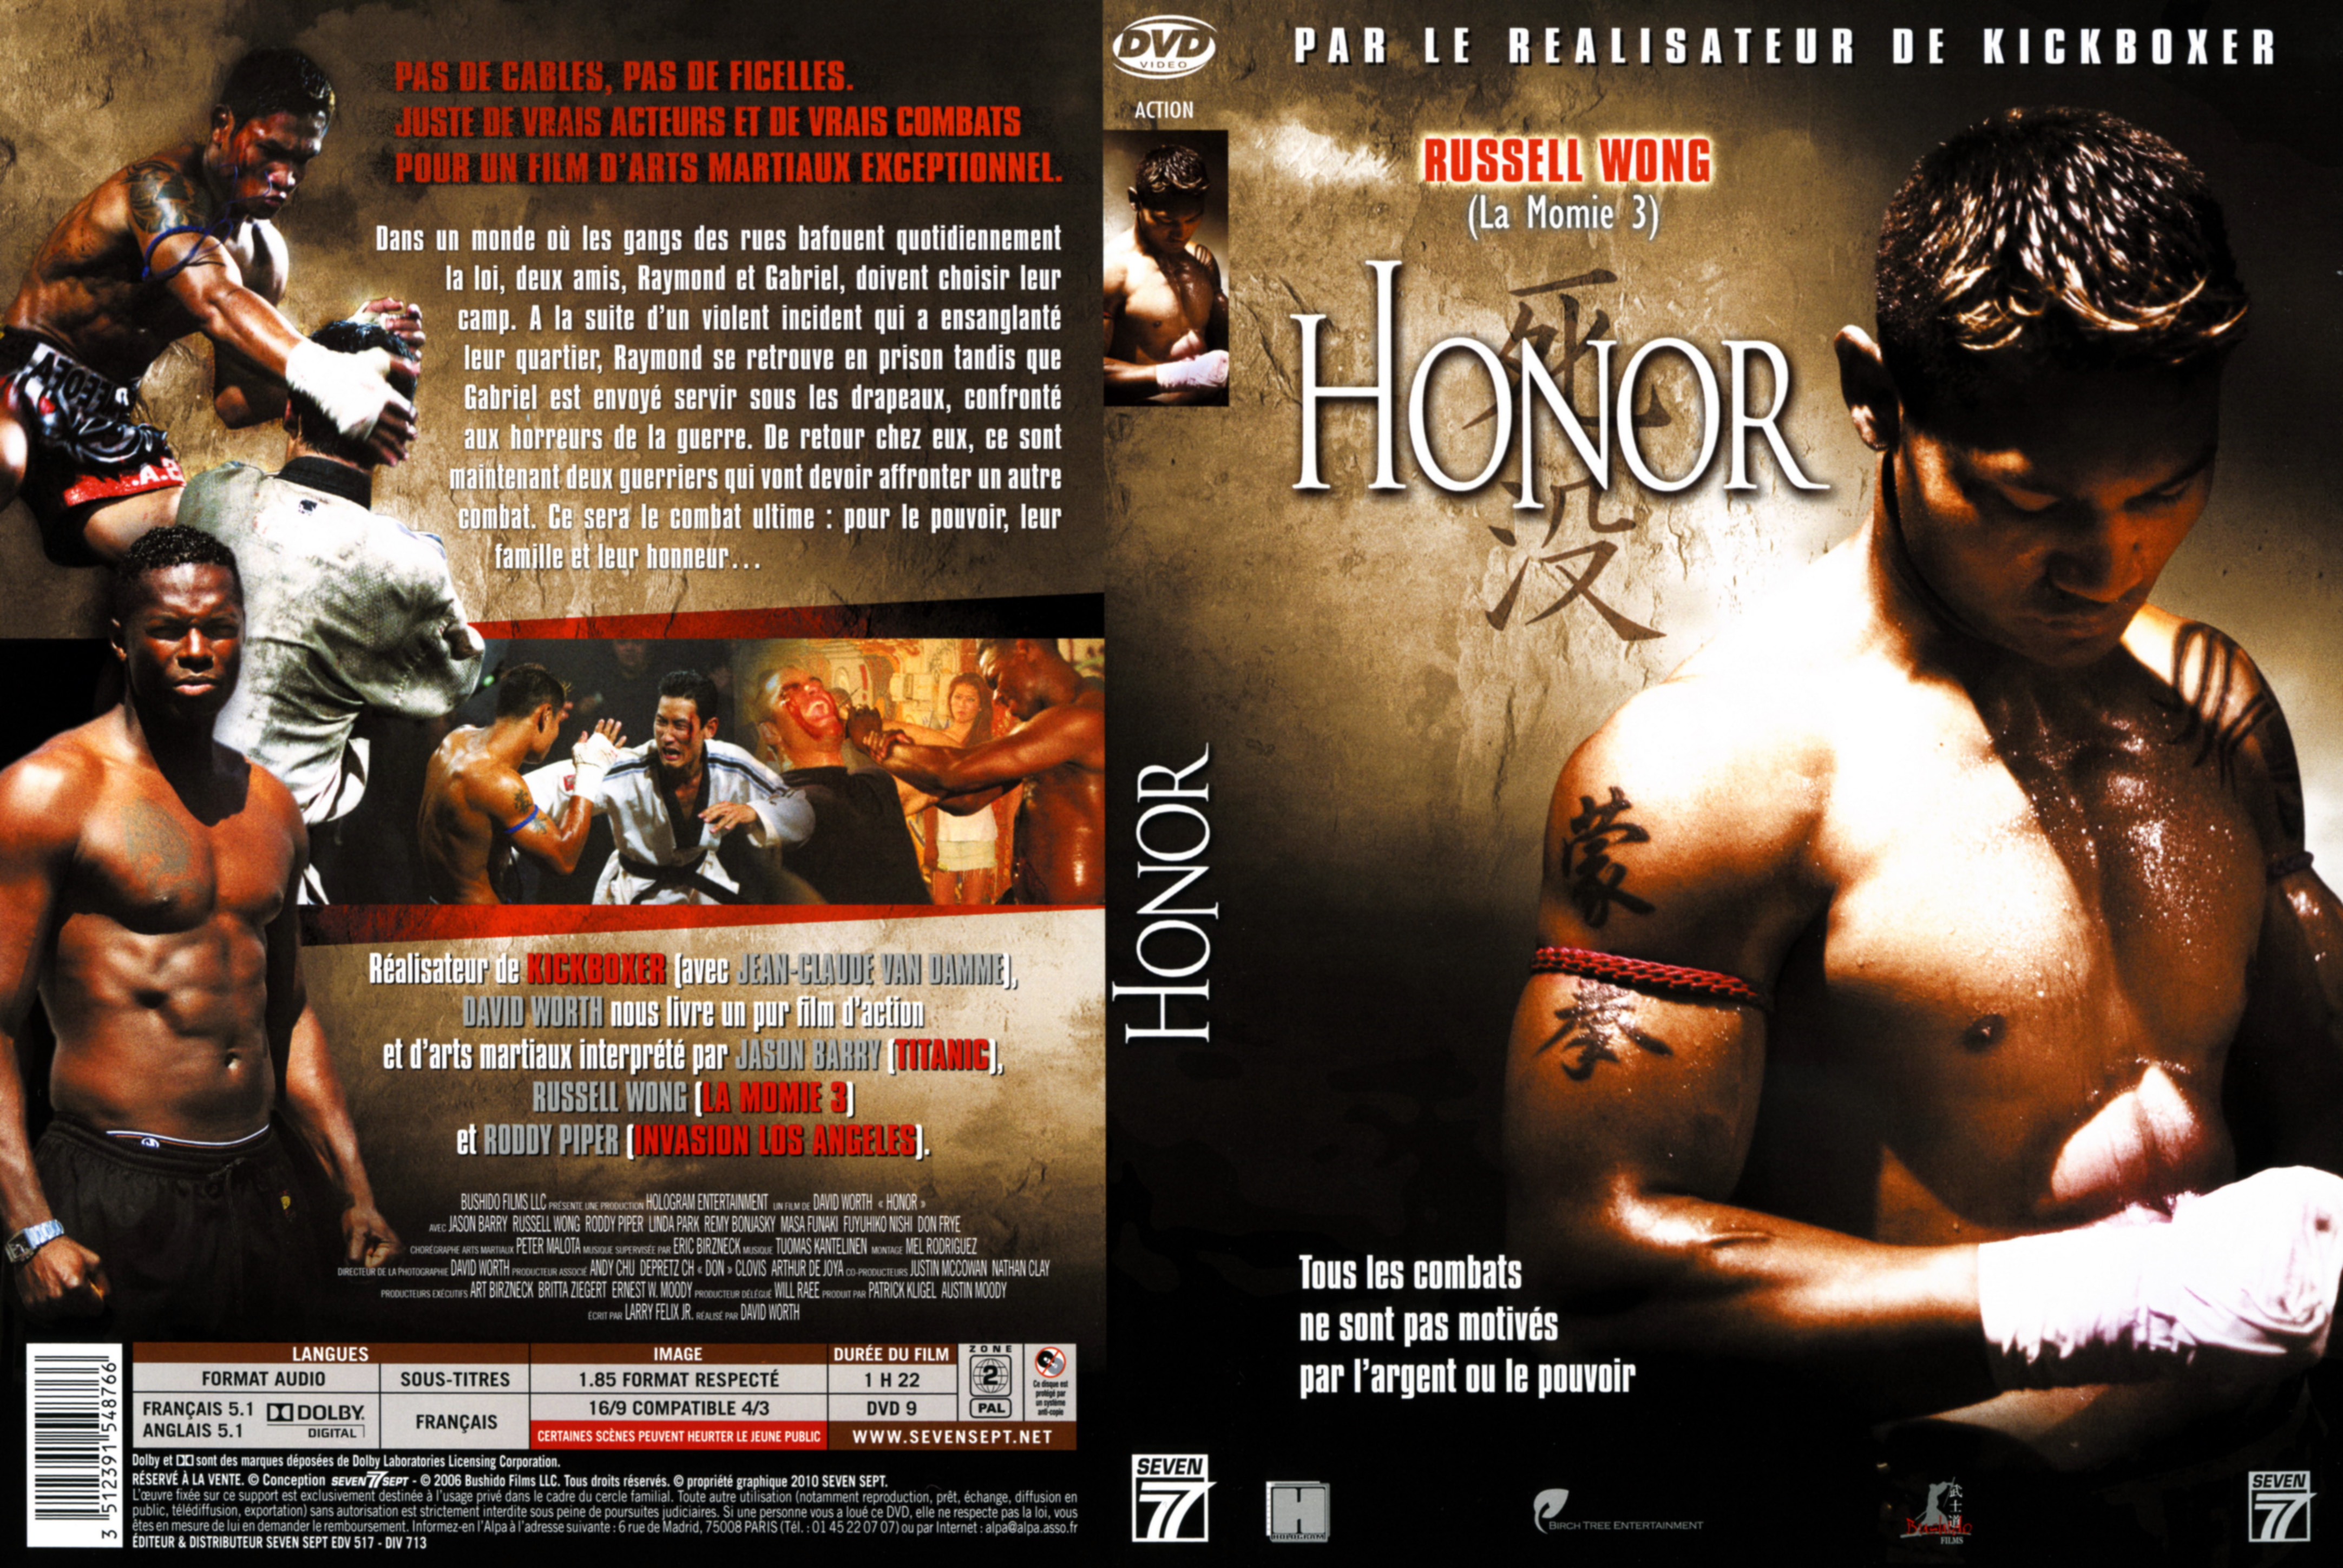 Jaquette DVD Honor